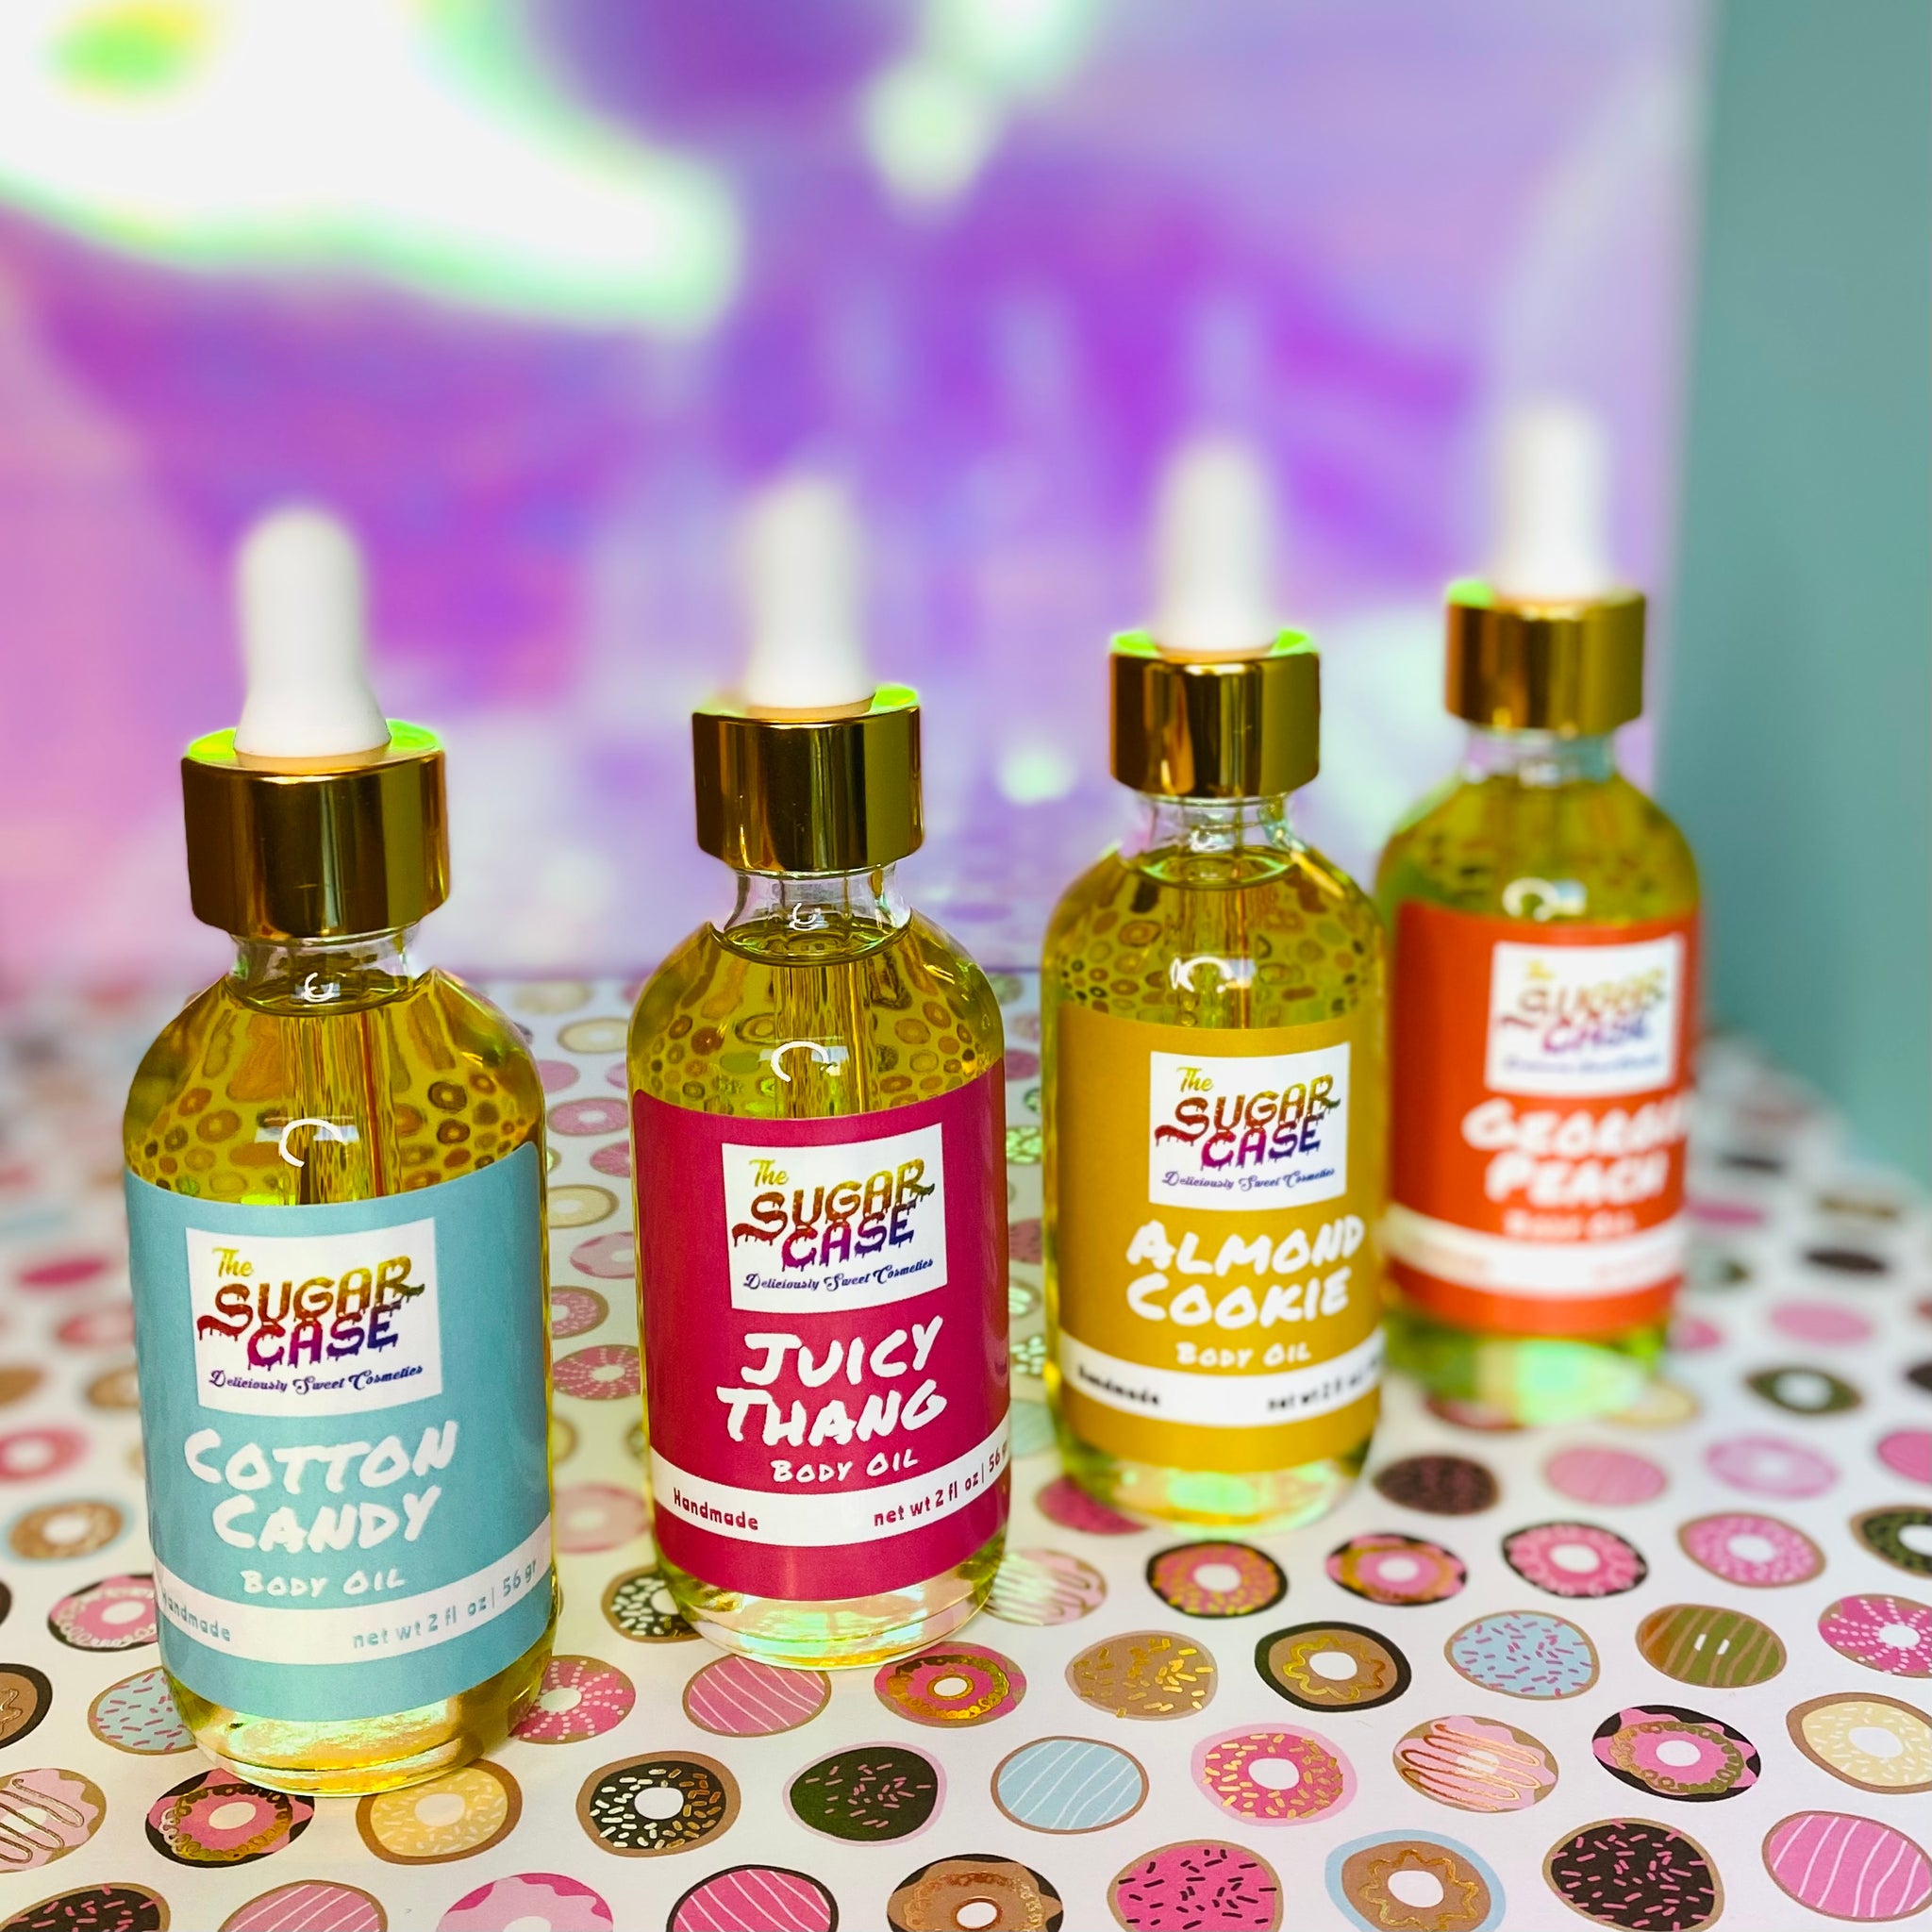 Juicy Thang Body Oil